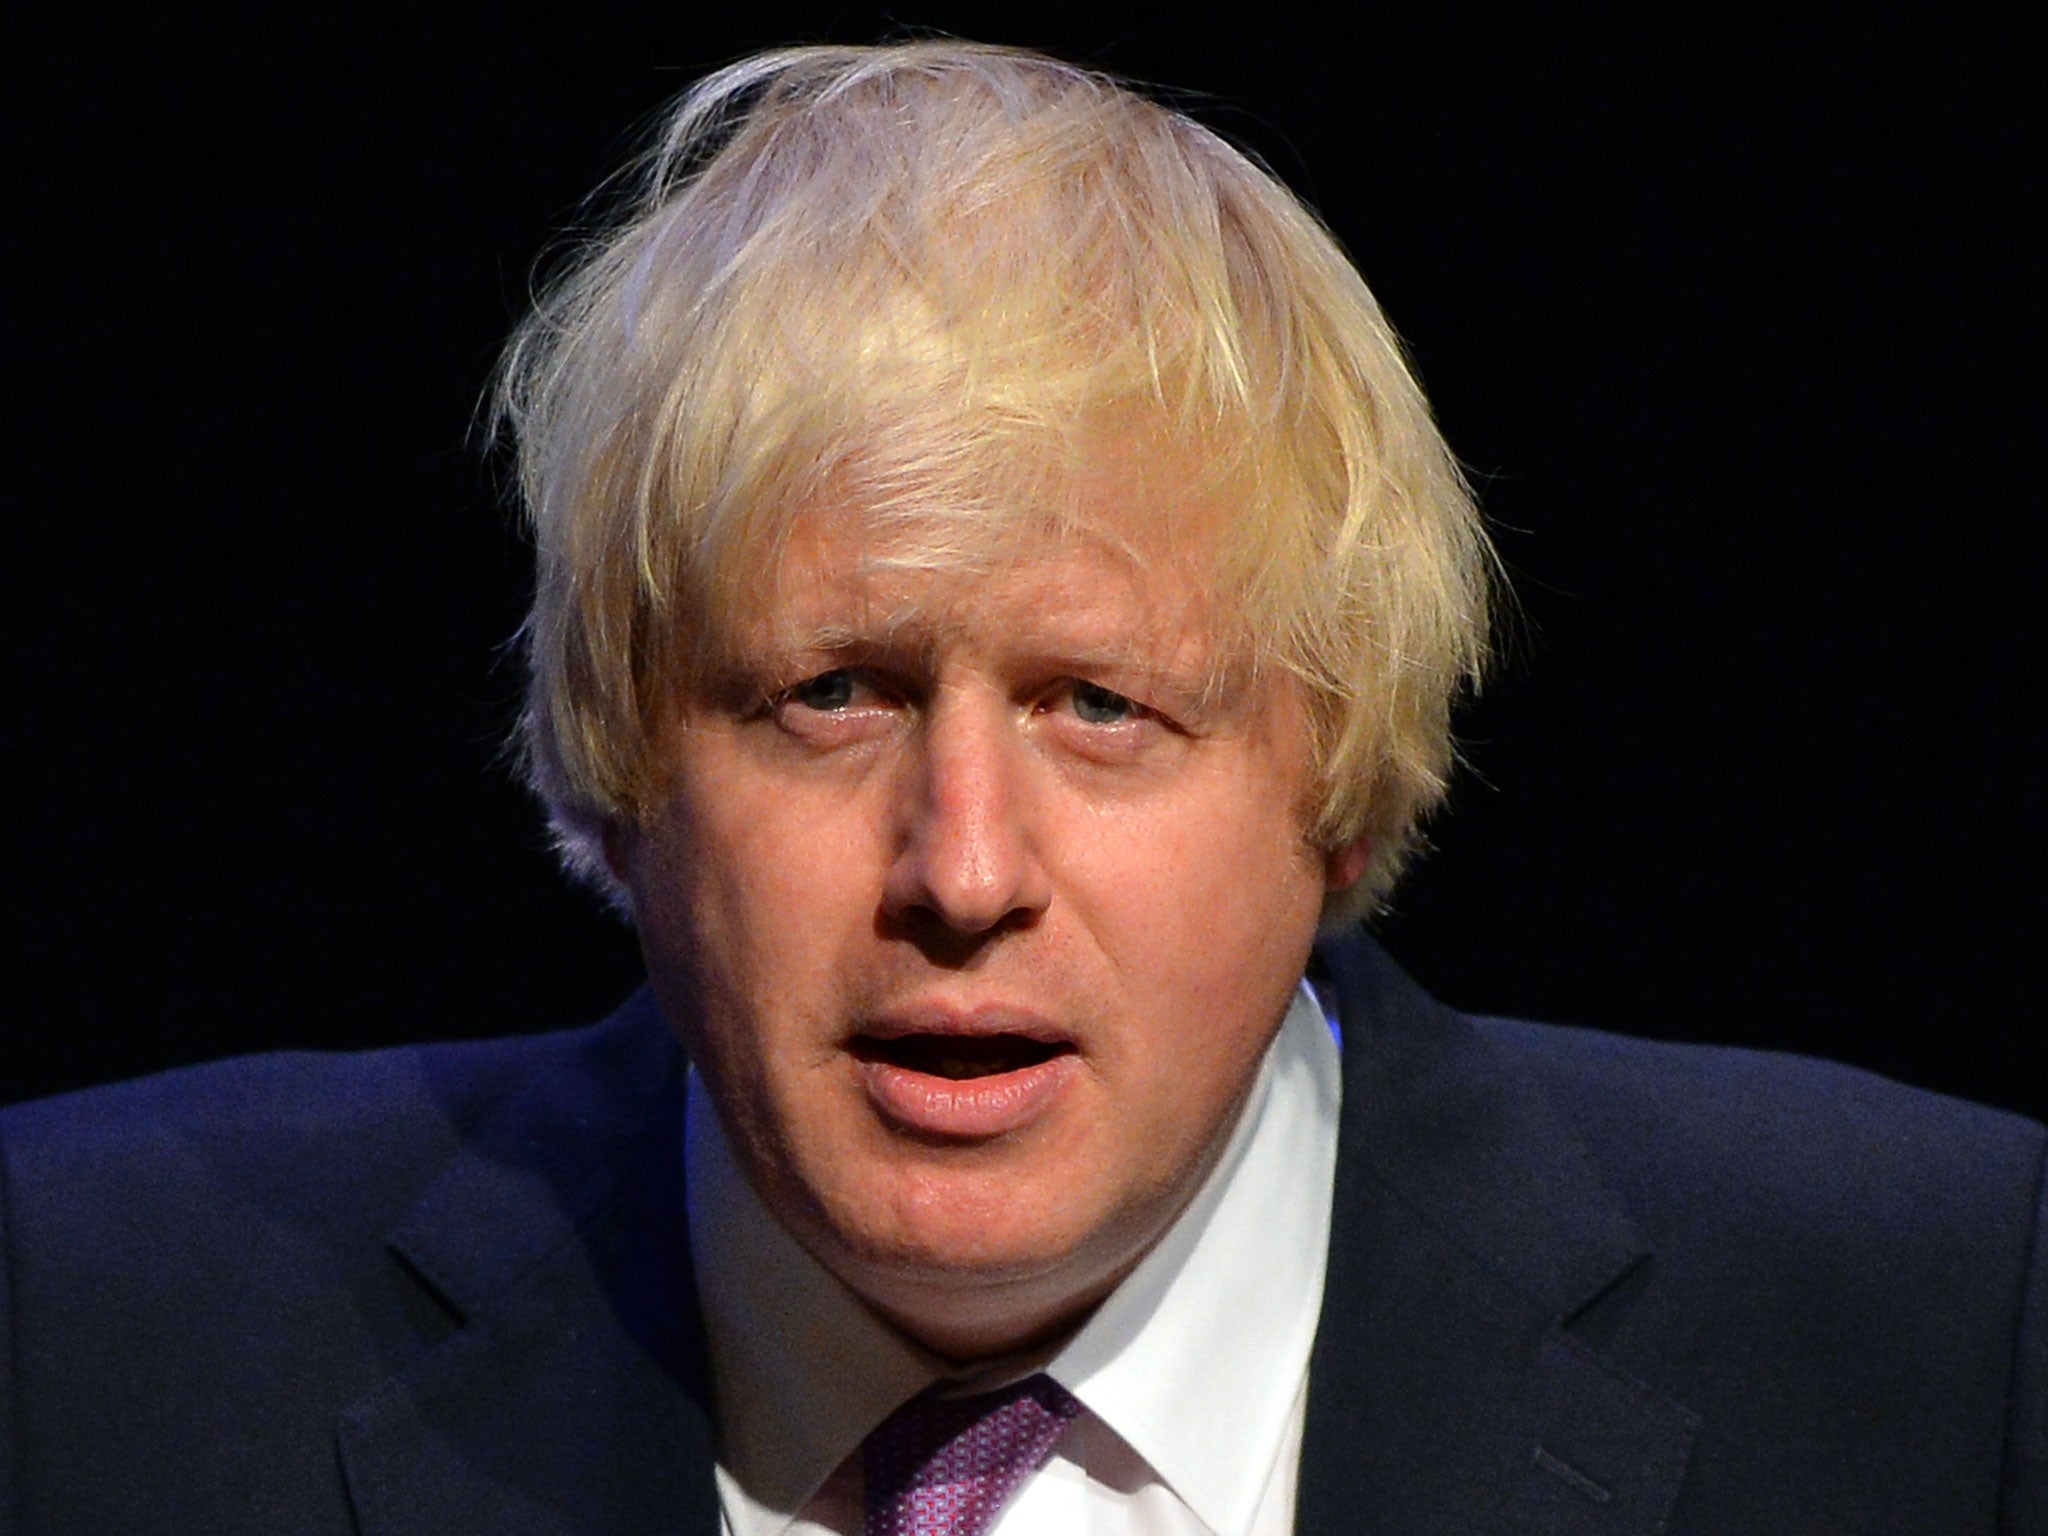 Boris Johnson had called for the law to be changed 'so that children who are being turned into potential killers or suicide bombers can be removed into care – for their own safety and for the safety of the public'